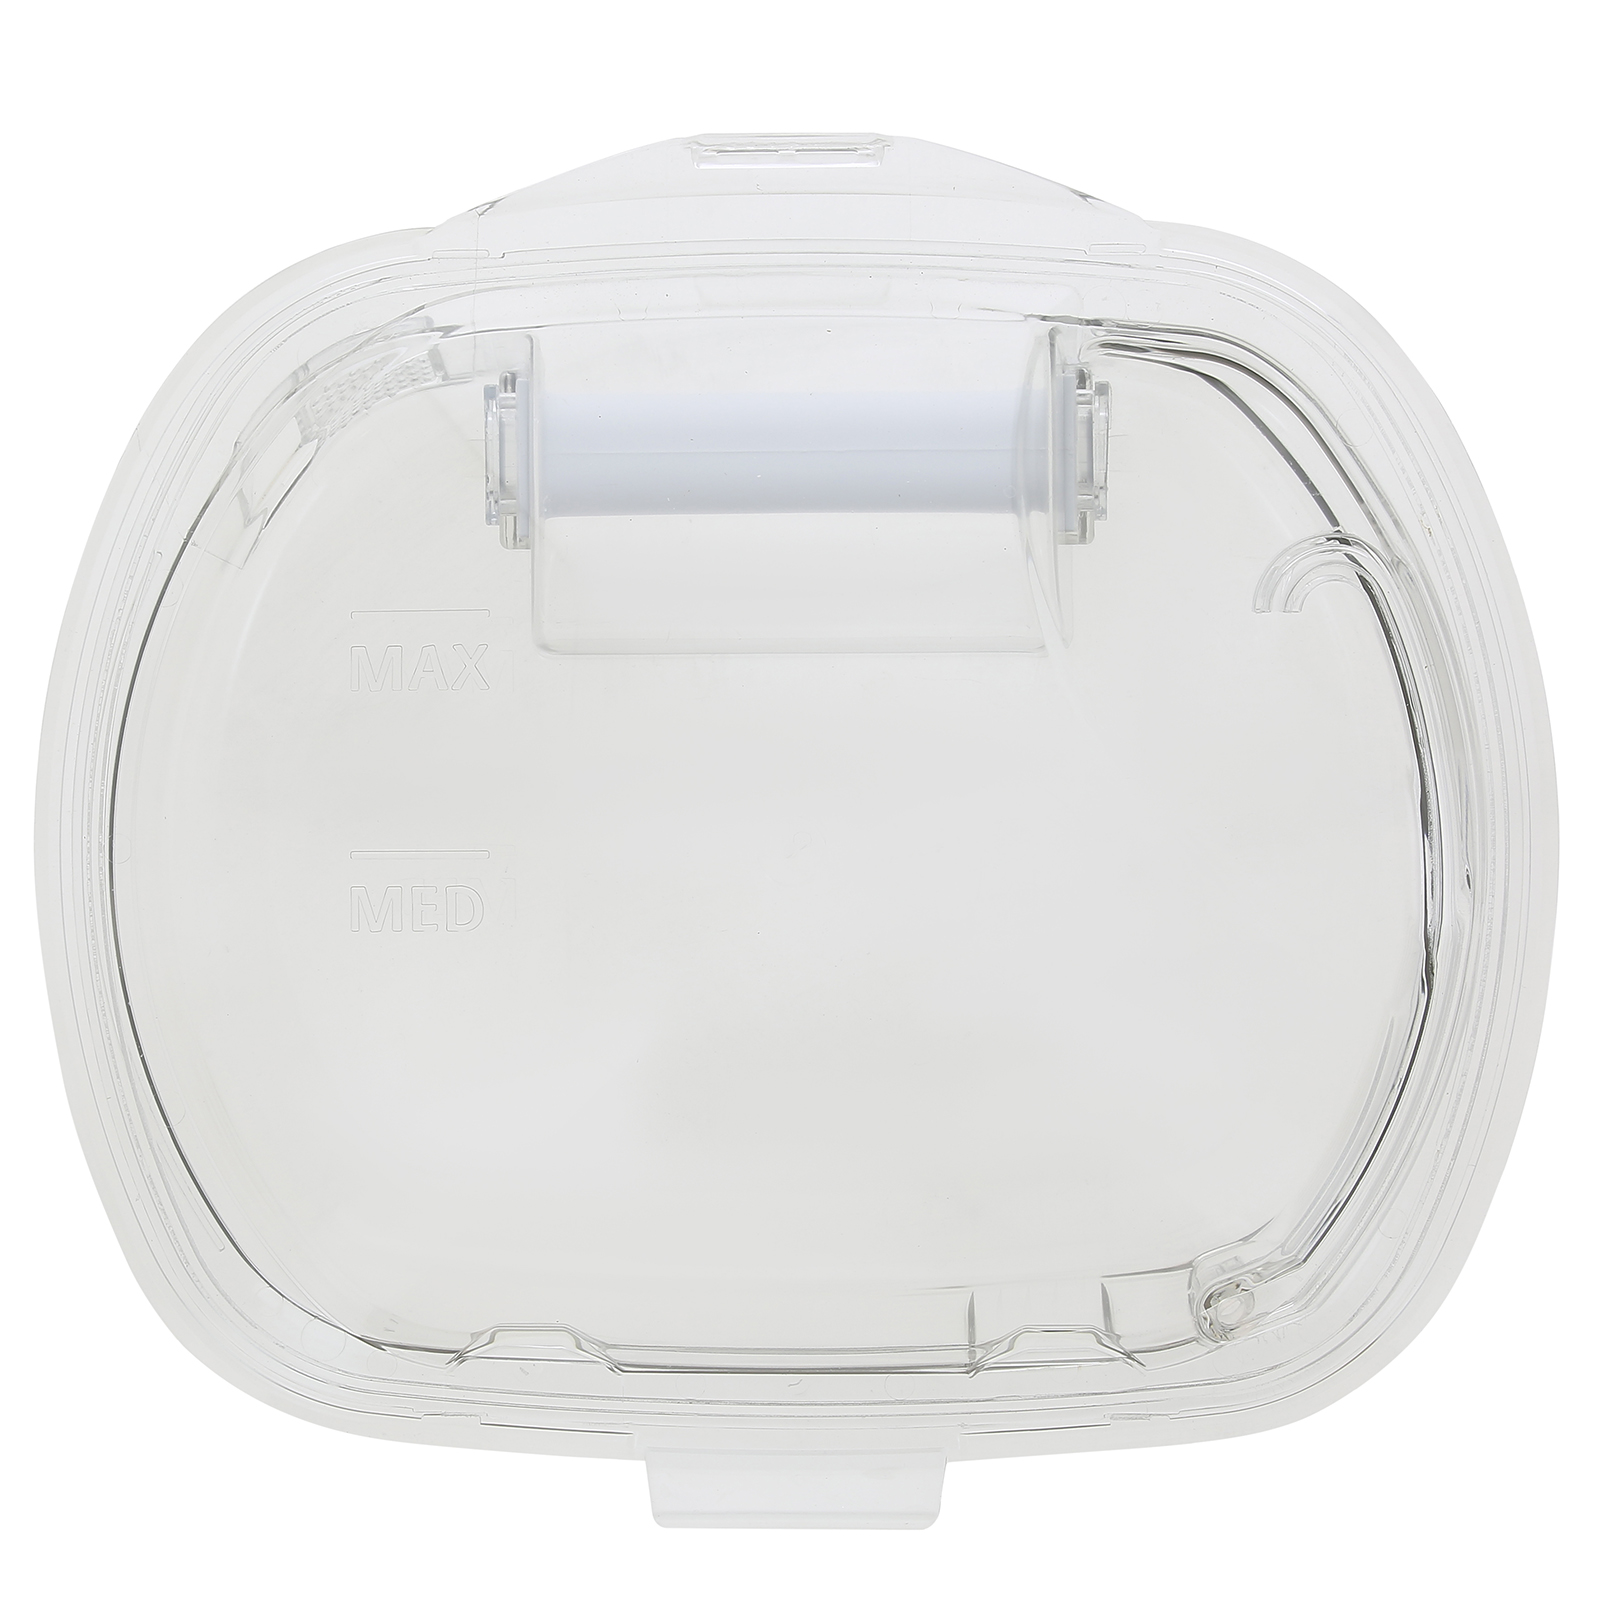 Baumatic Tumble Dryer Water Container 49125480